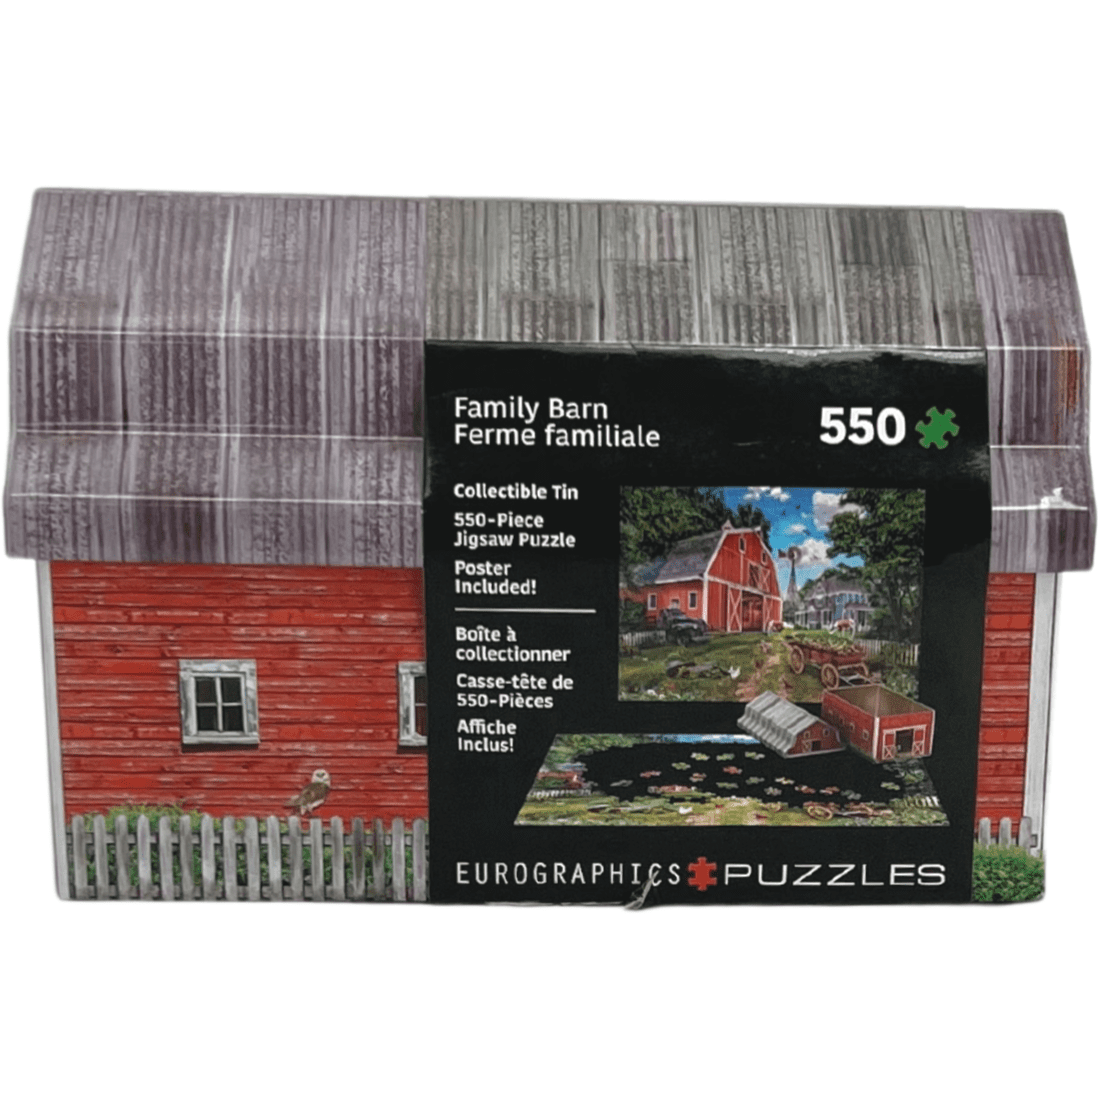 Eurographics Puzzles Family Barn / 550 Pieces / Ages 3+